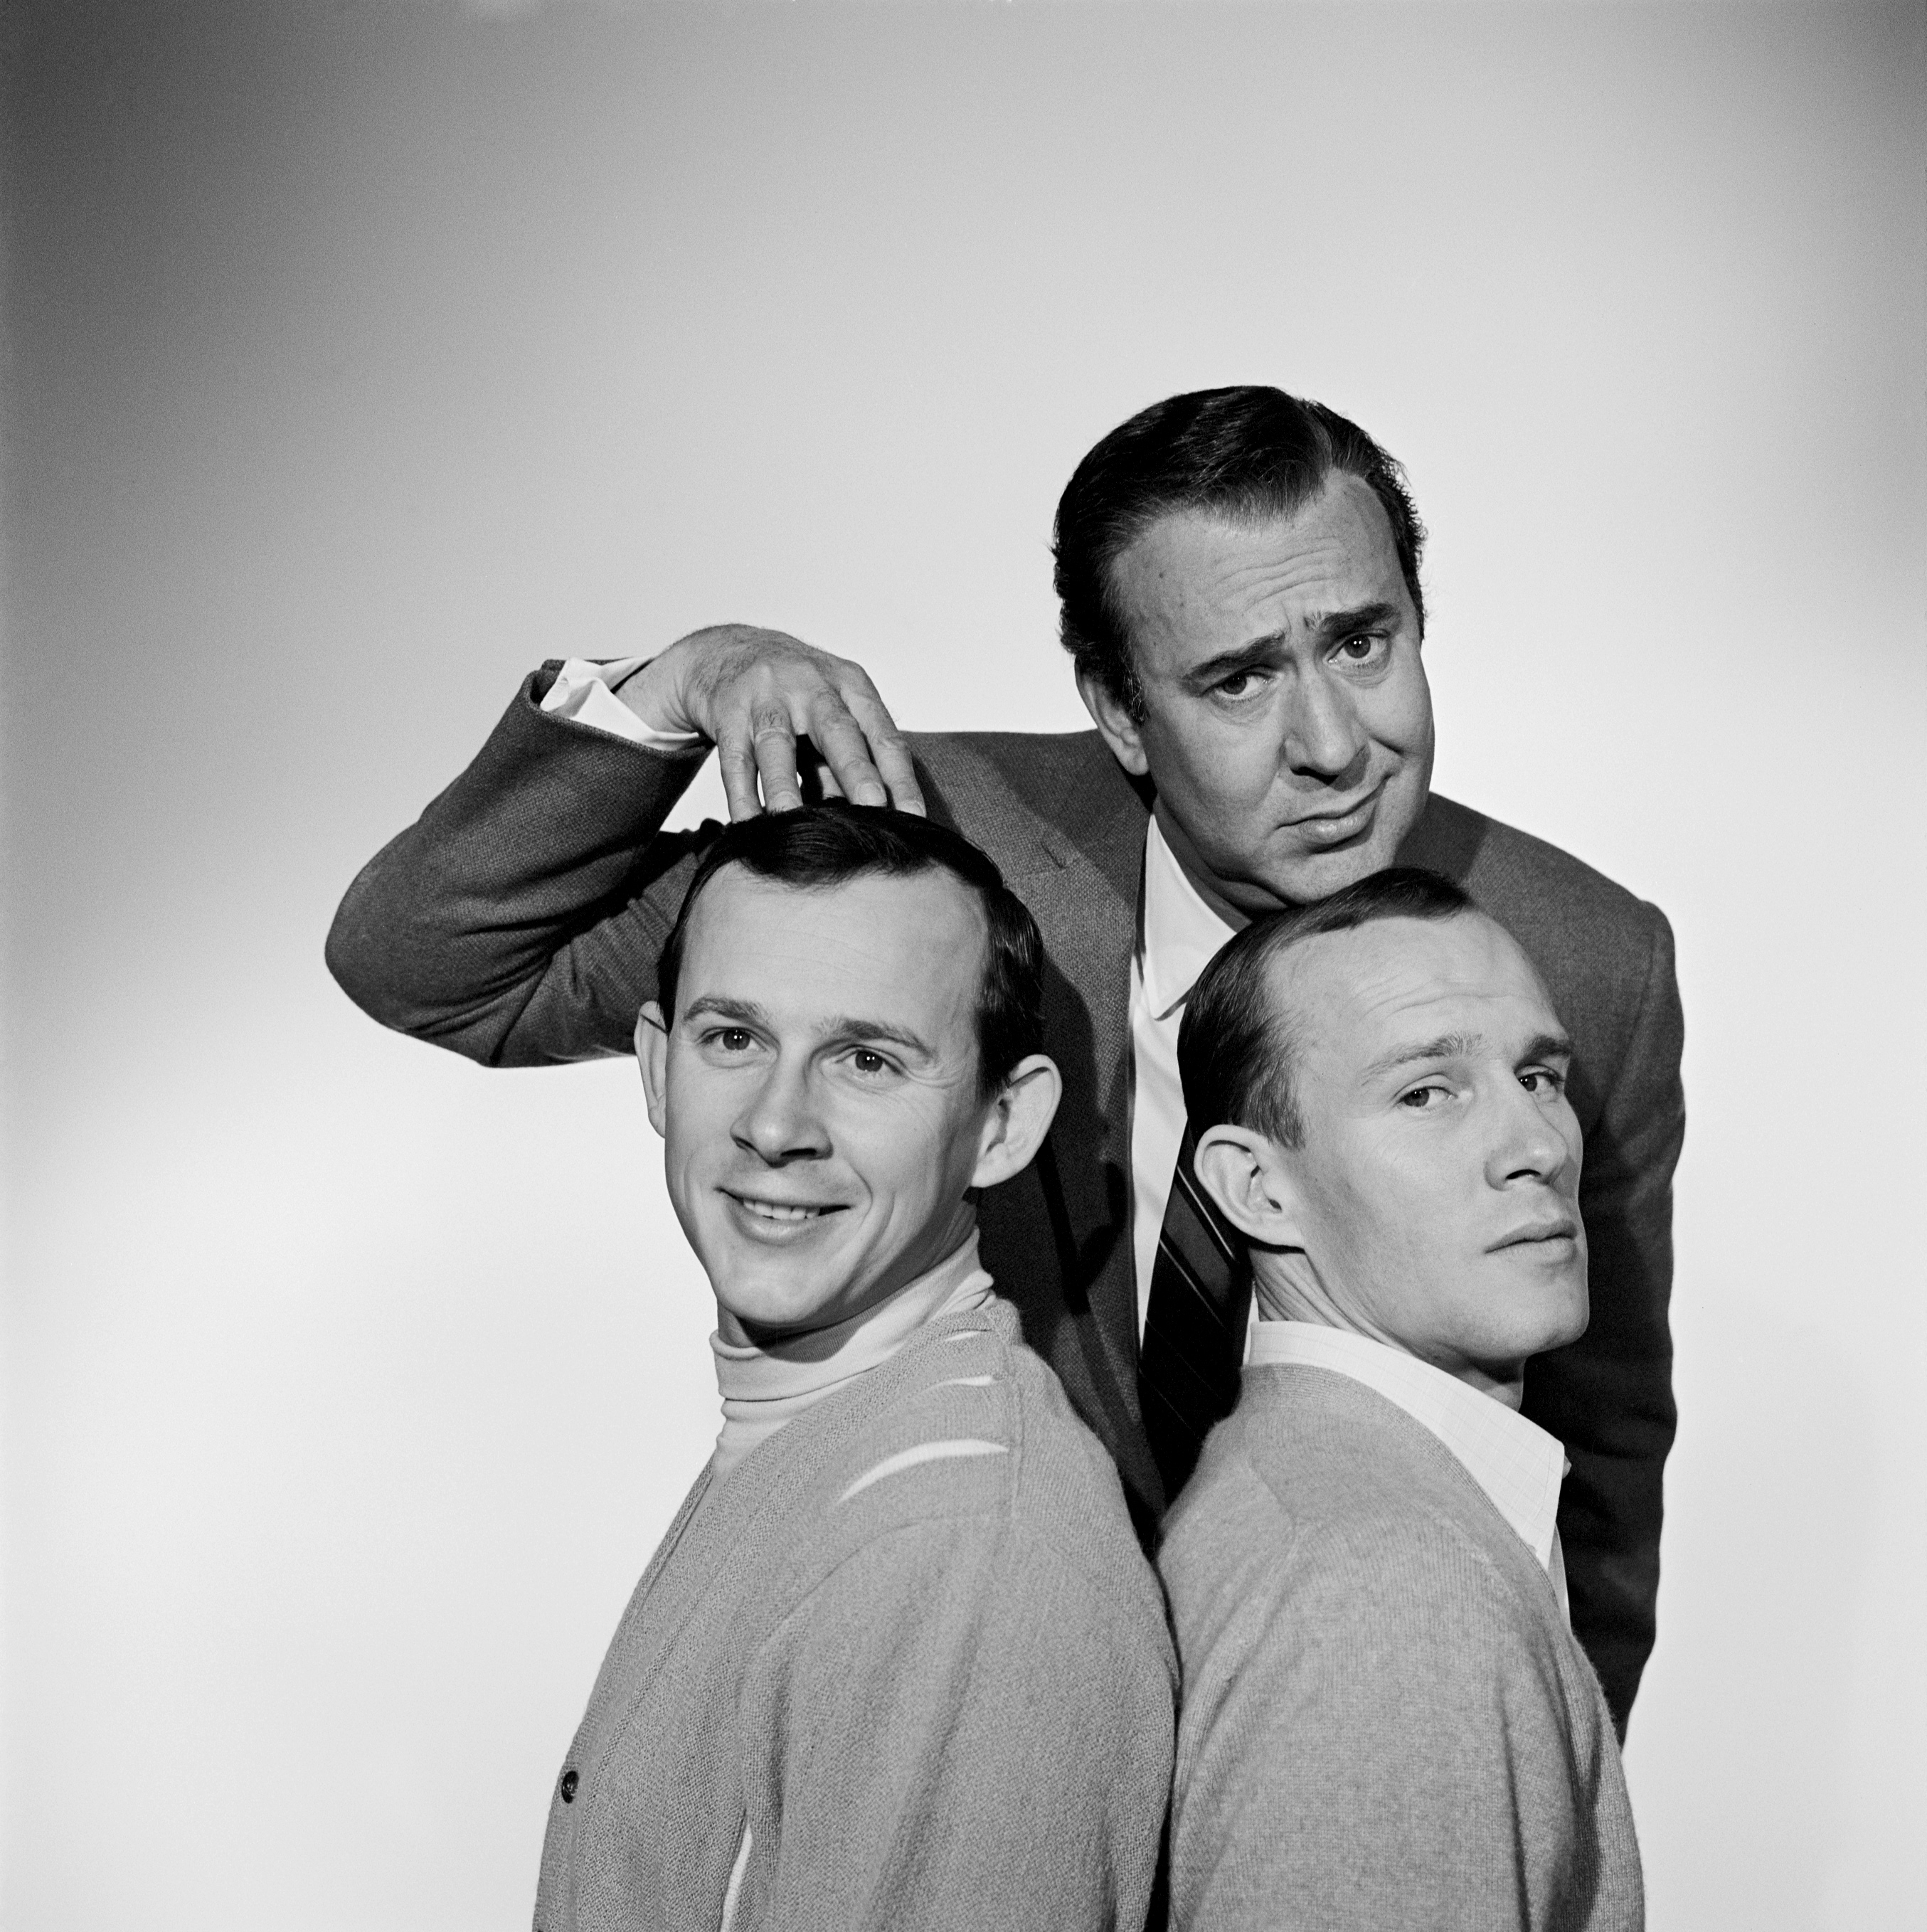 Carl Riener with Dick and Tom Smothers